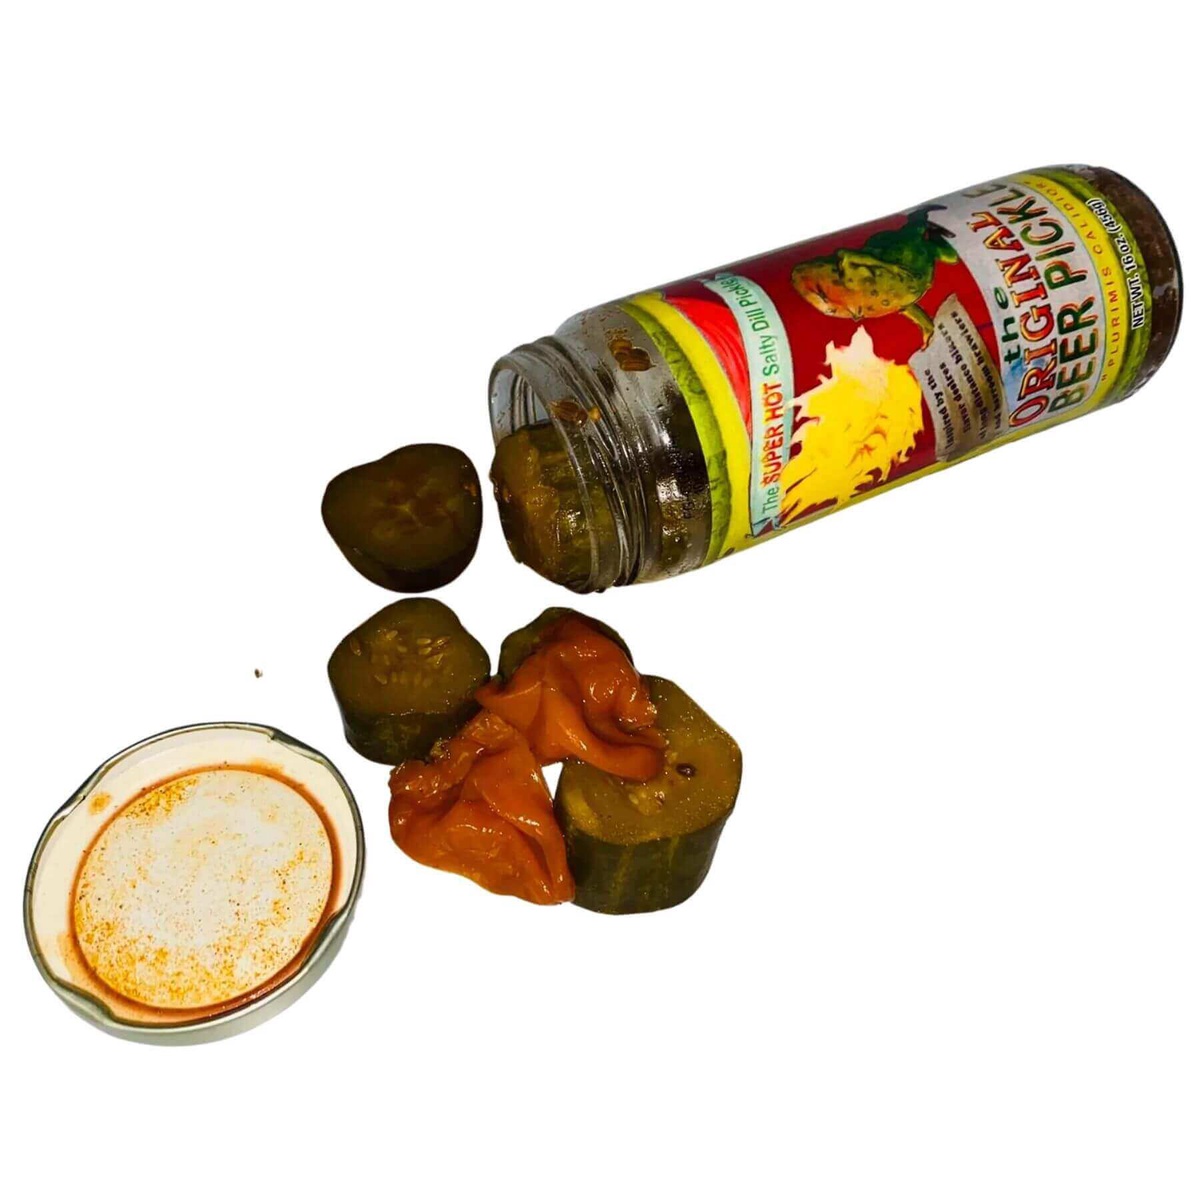 Spicy Pickles: How to enjoy your food to the fullest